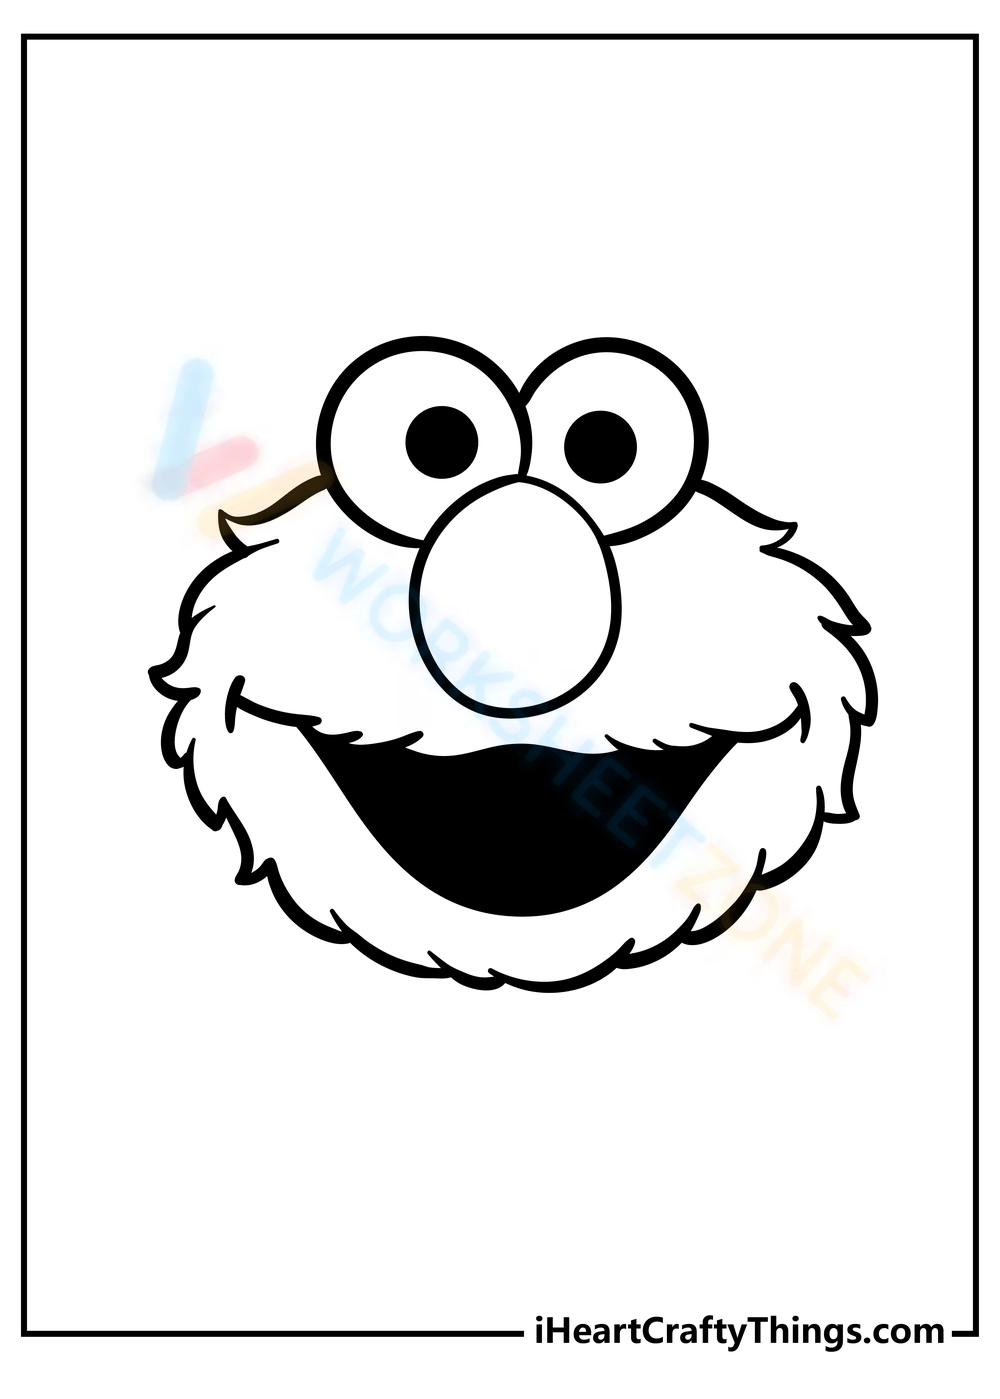 Free collection of elmo coloring pages for kids